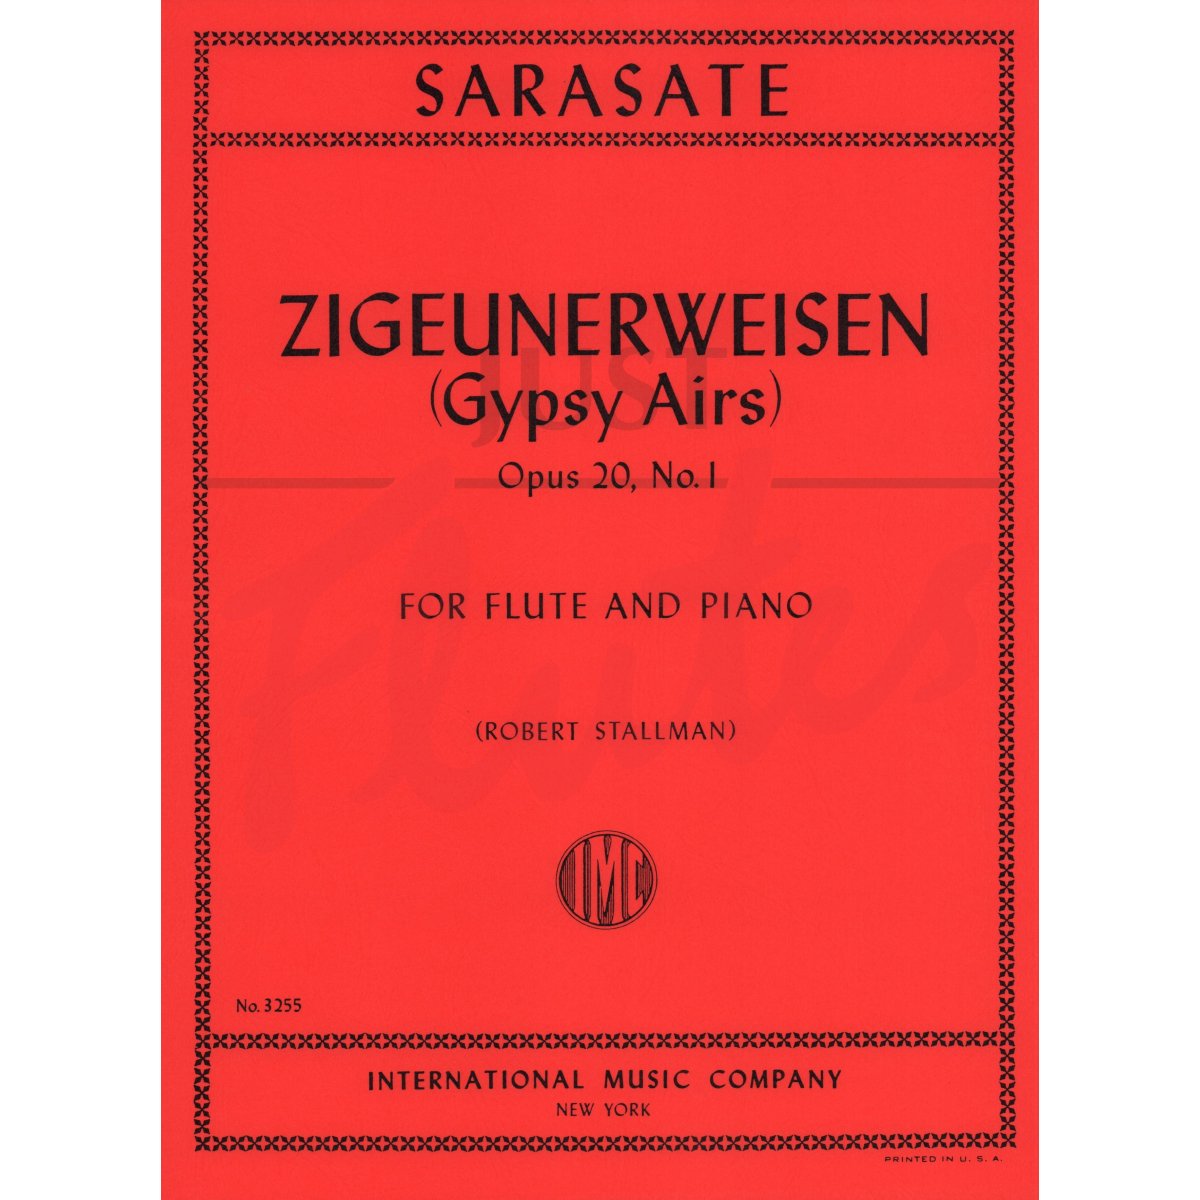 Zigeunerweisen (Gypsy Airs) for Flute and Piano